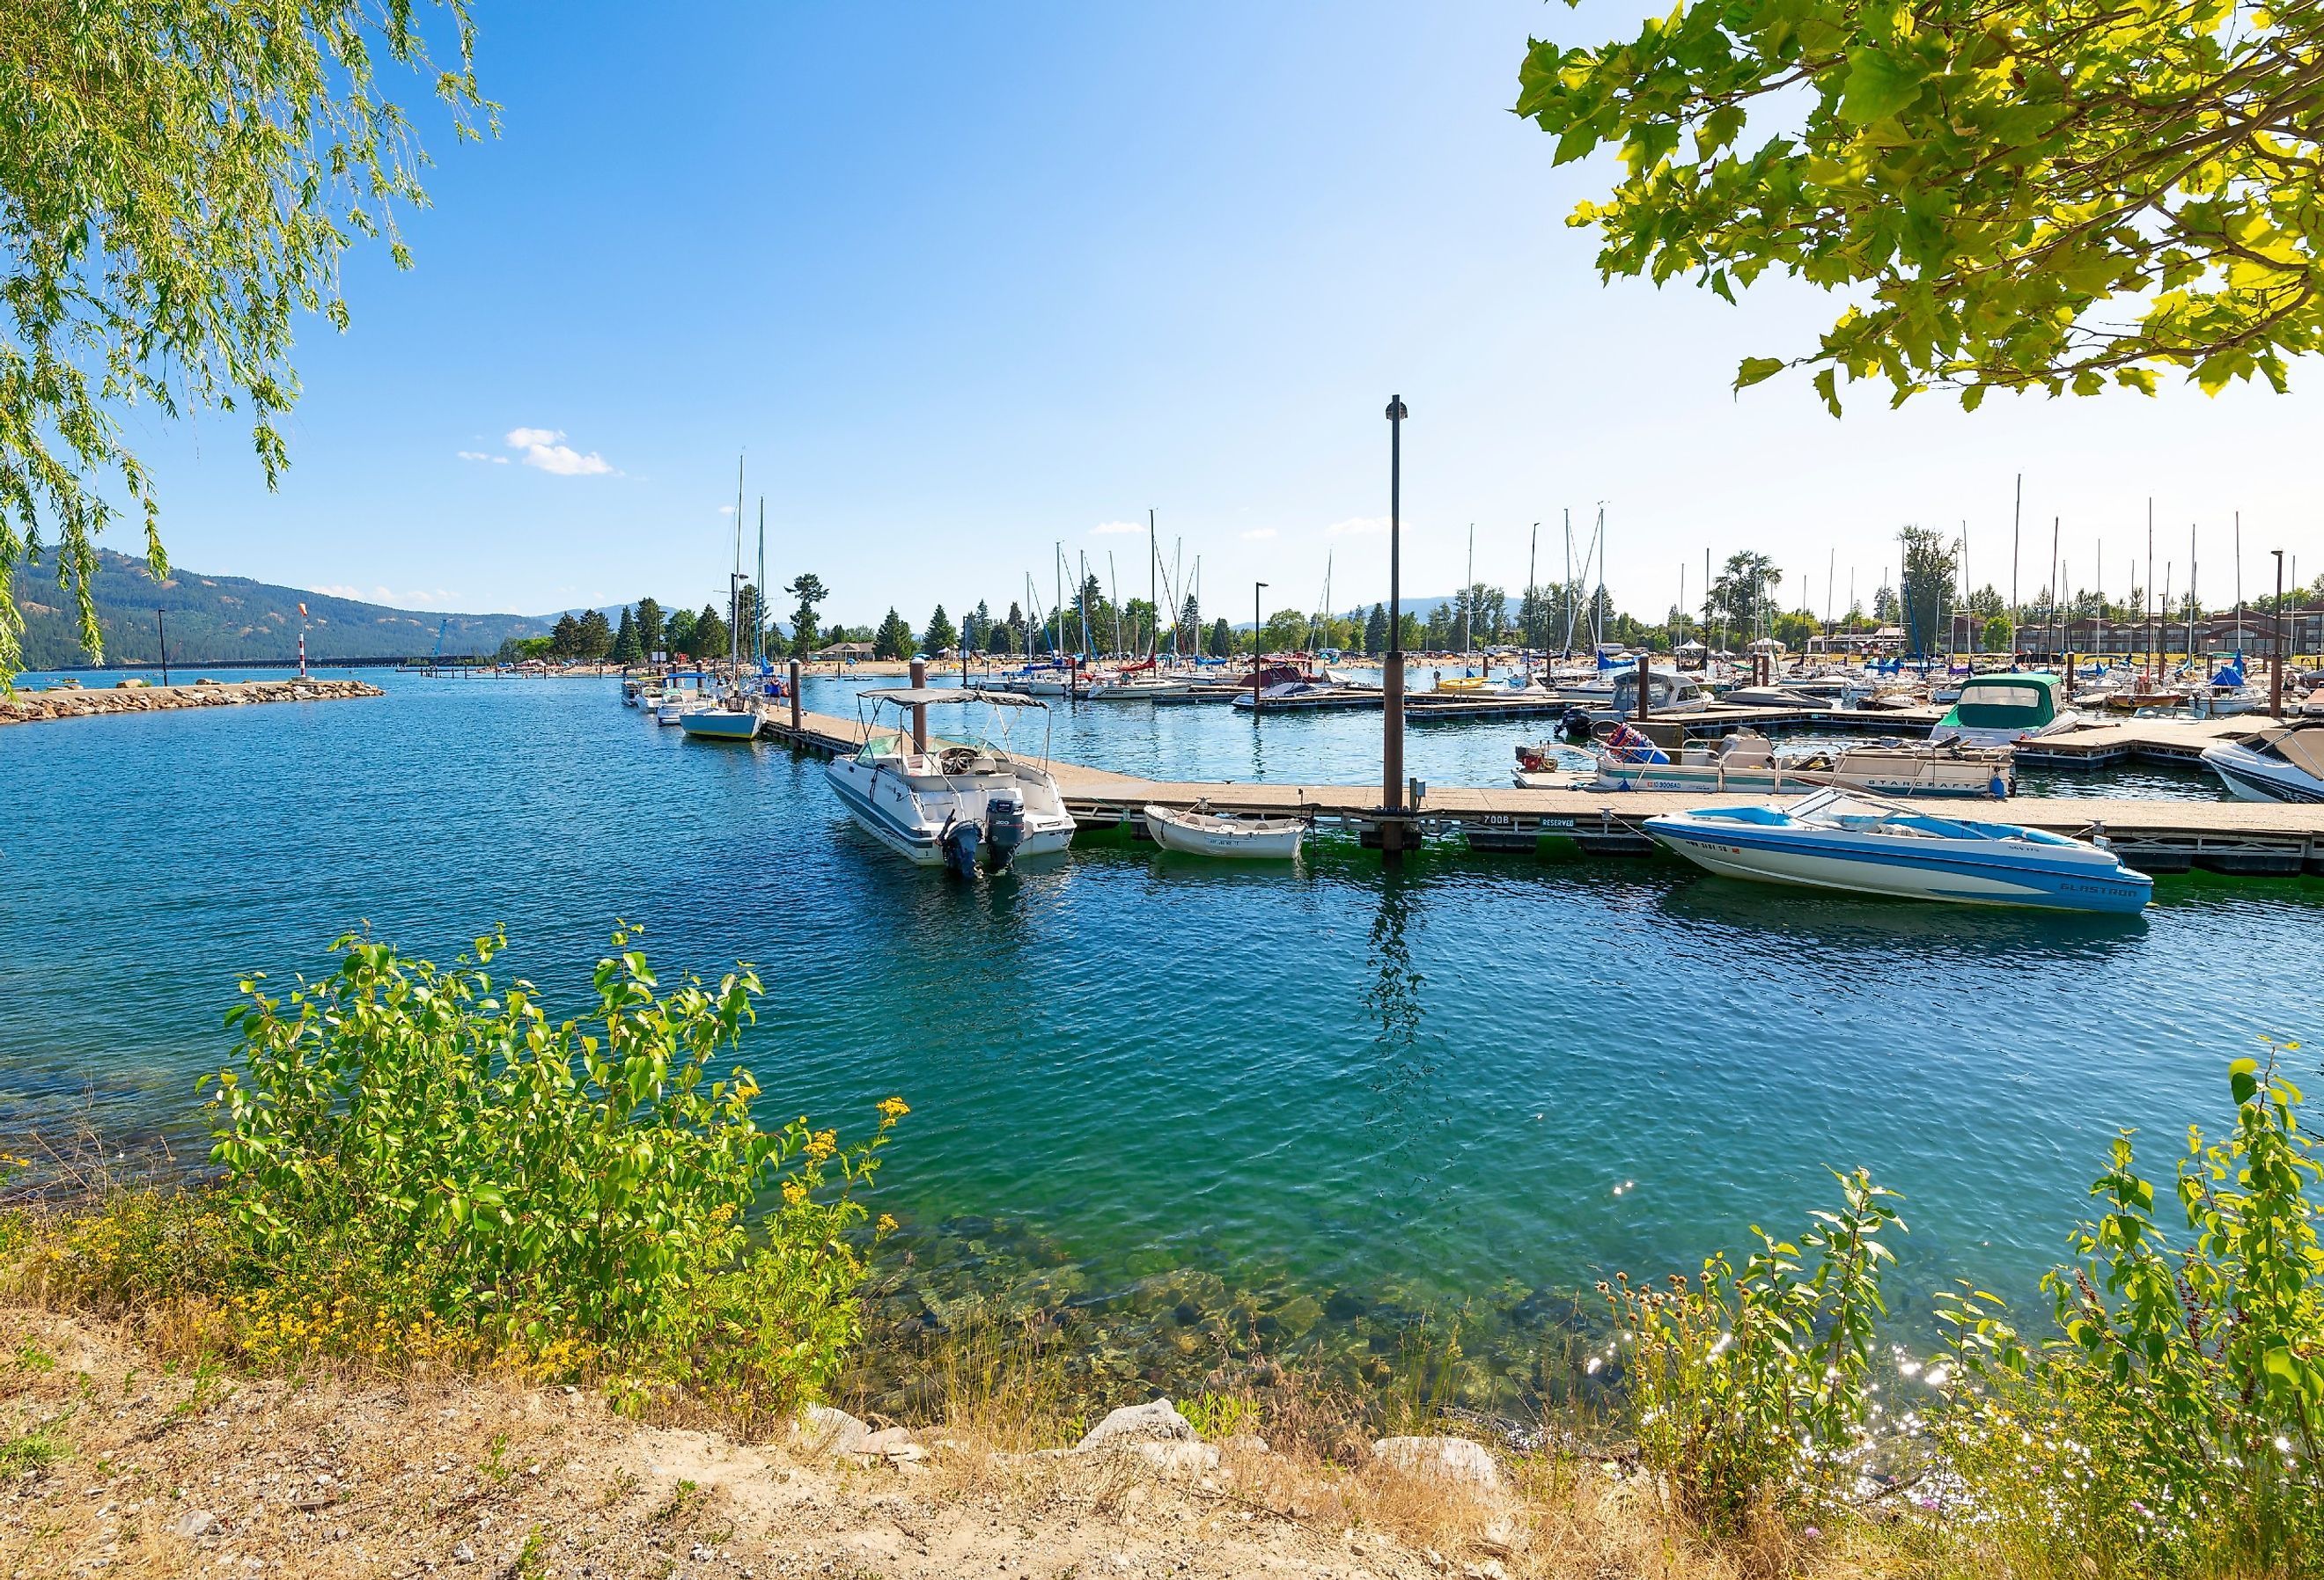 The marina and city beach area of downtown Sandpoint, Idaho, with boats filling the docks on Lake Pend Oreille on a summer day in the Idaho panhandle.